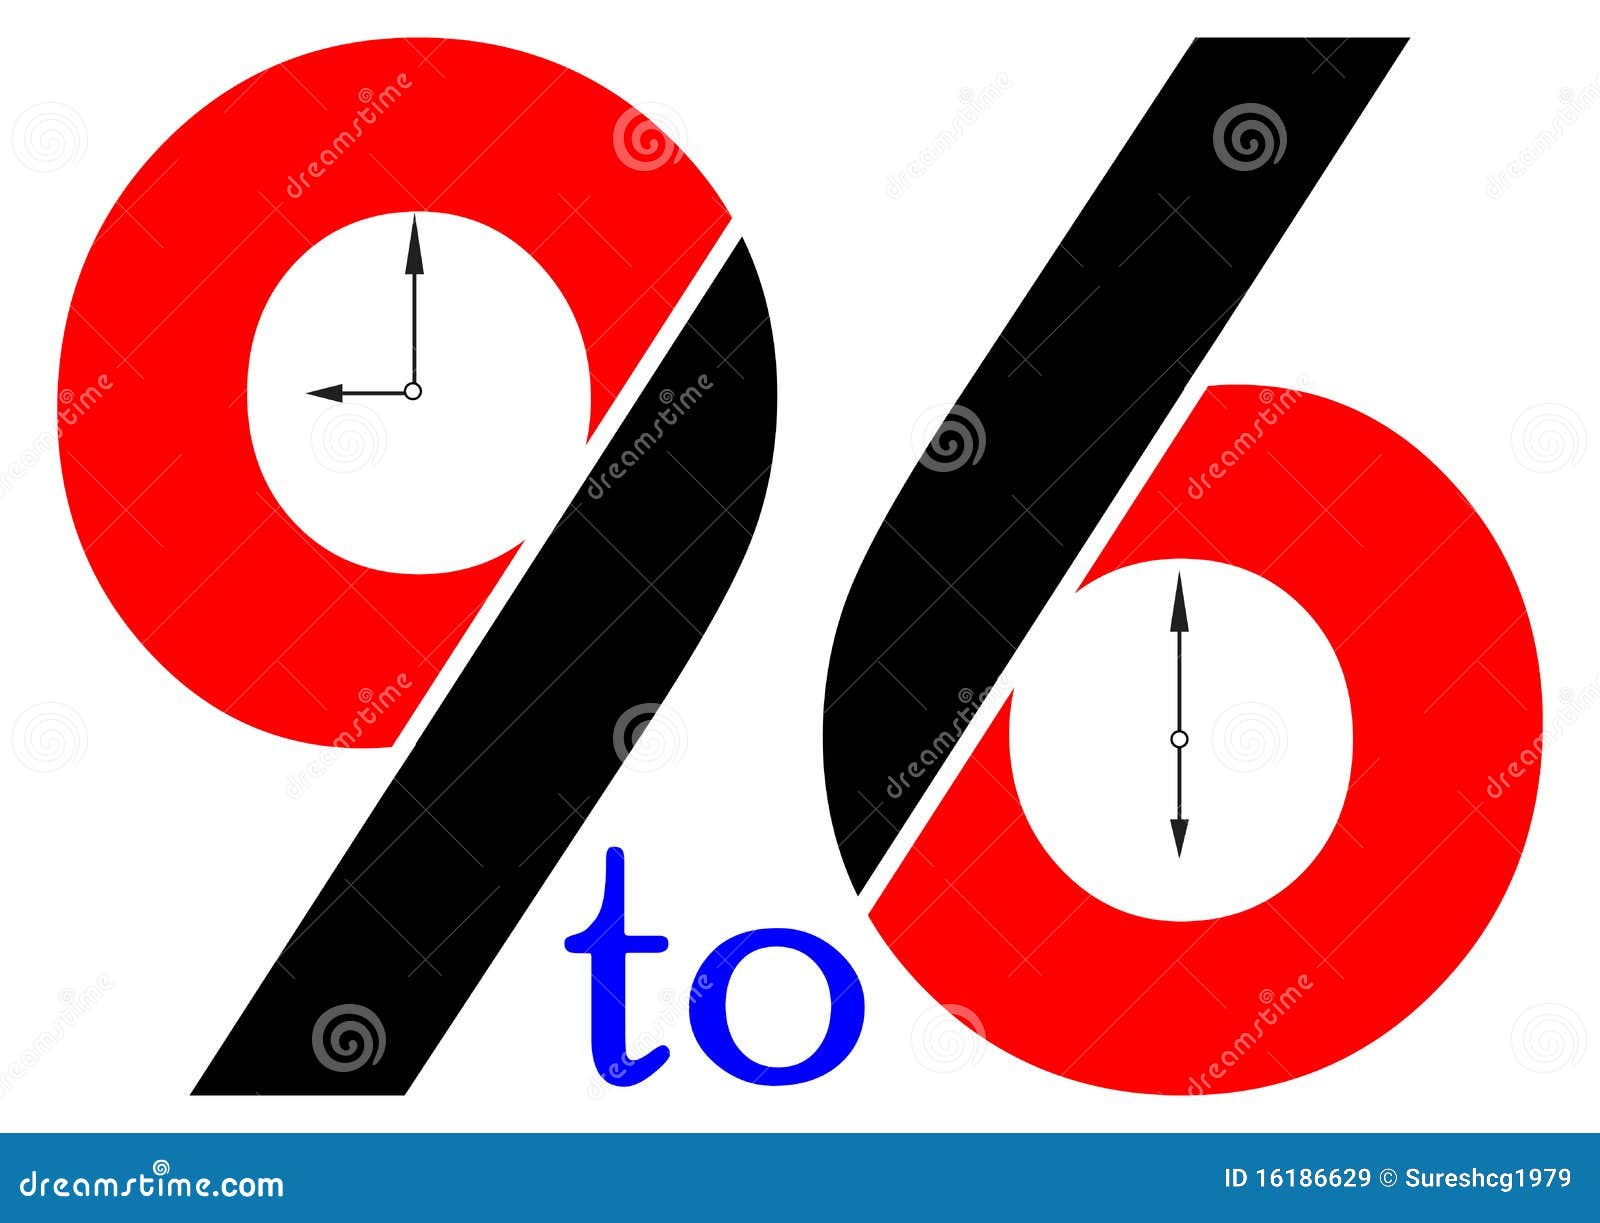 business hours clipart - photo #43